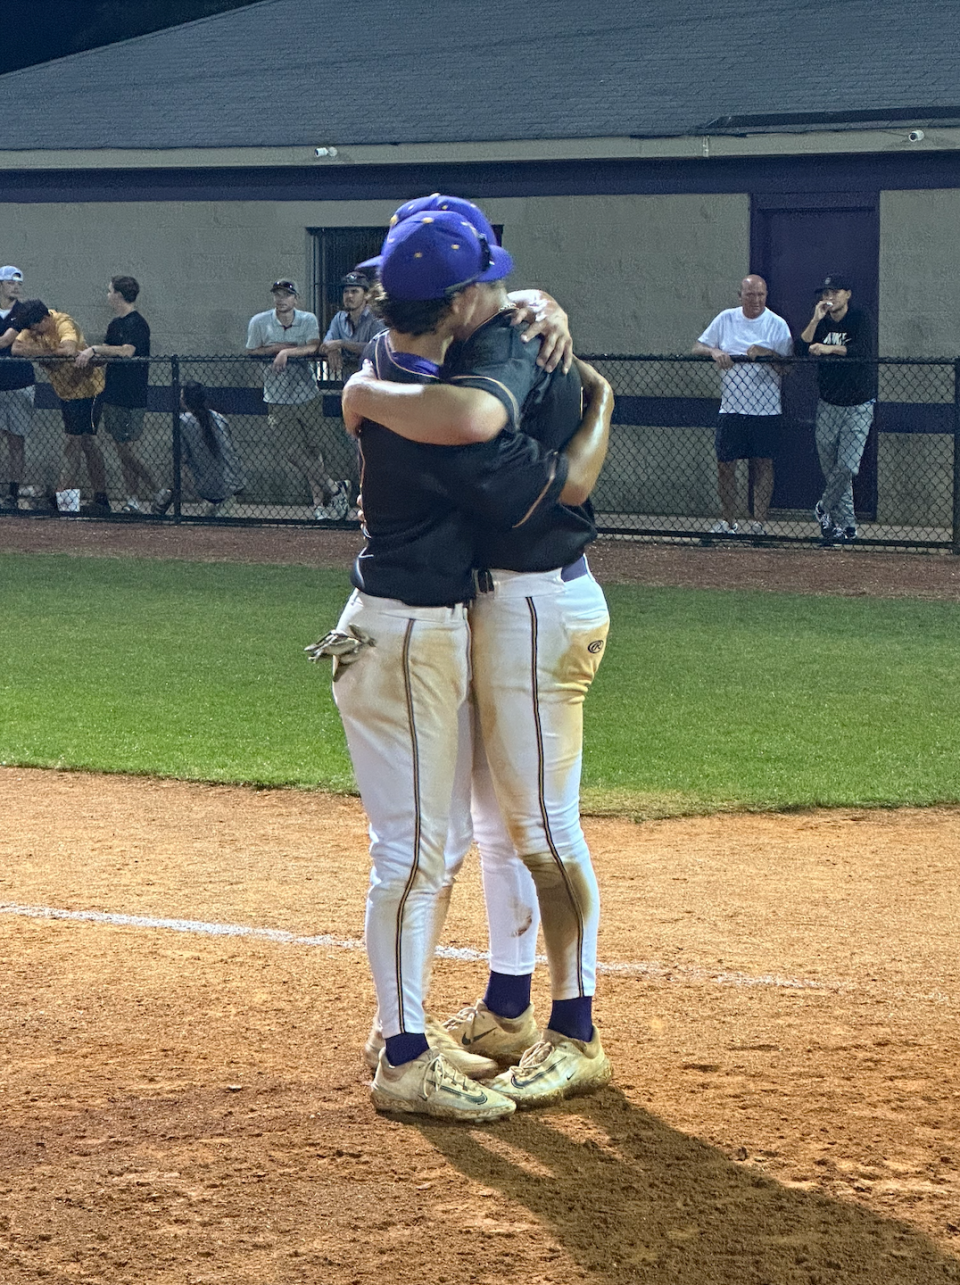 Clarksville's Kirk Weatherford hugs a teammate after the Wildcats clinched a TSSAA state tournament berth with a 5-0 win over Collierville.